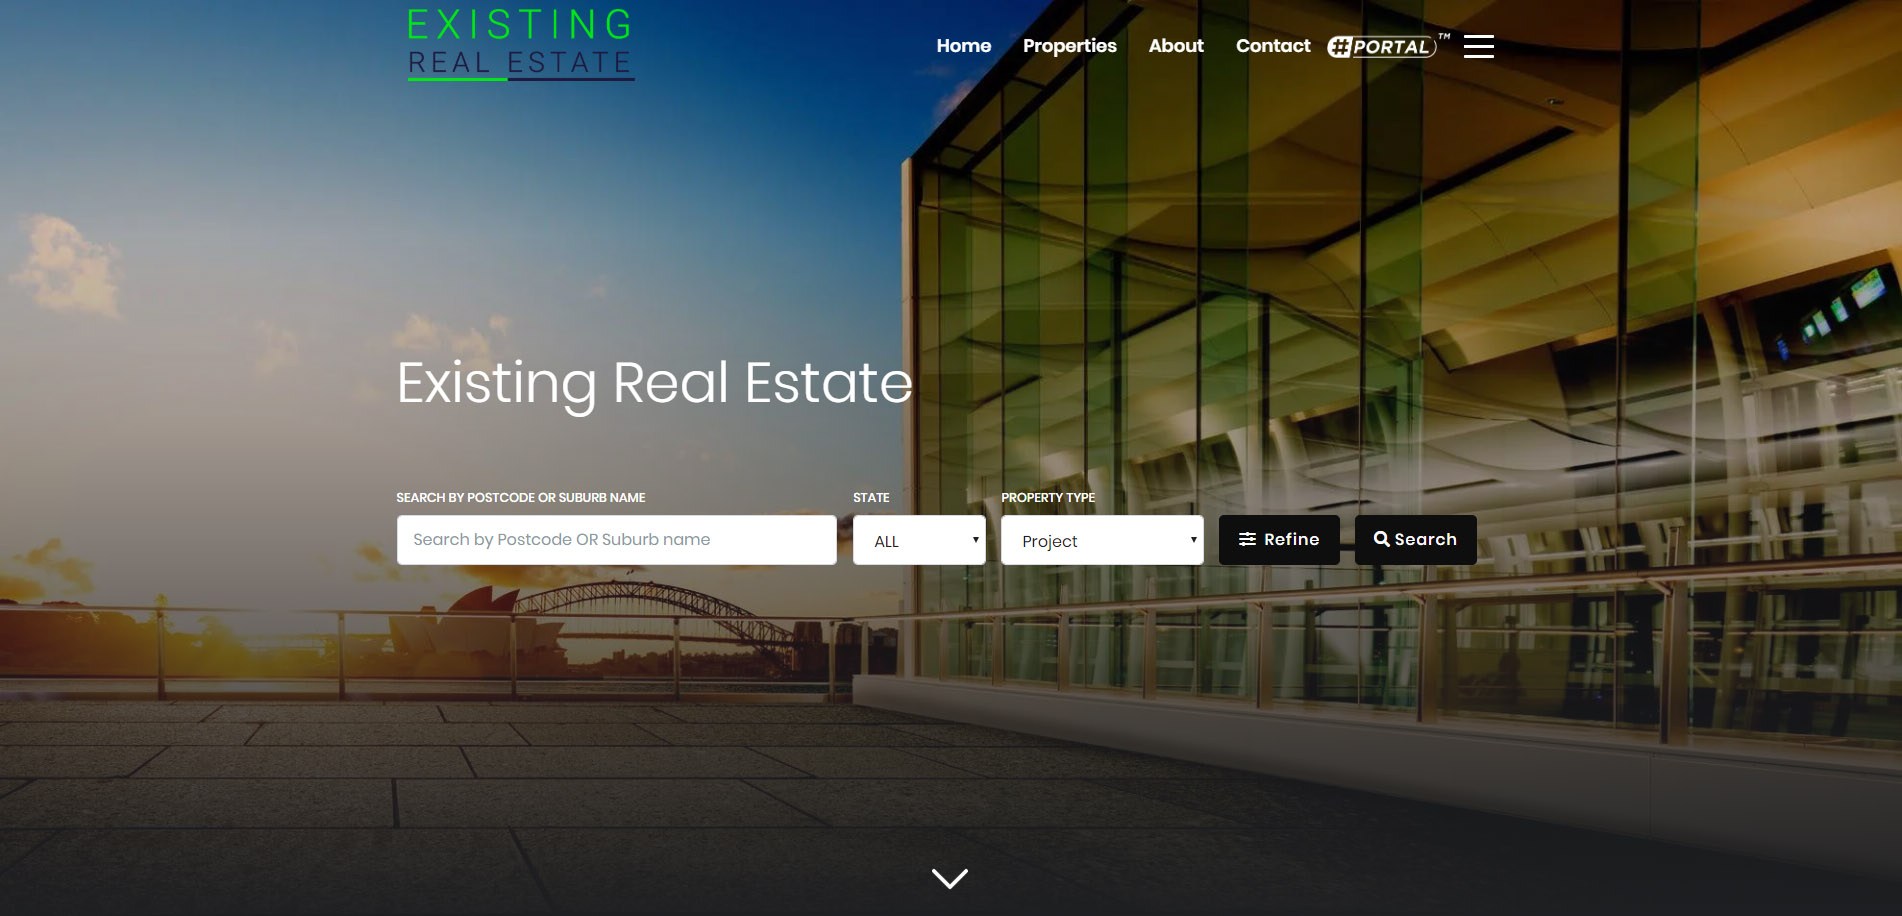 Existing Real Estate